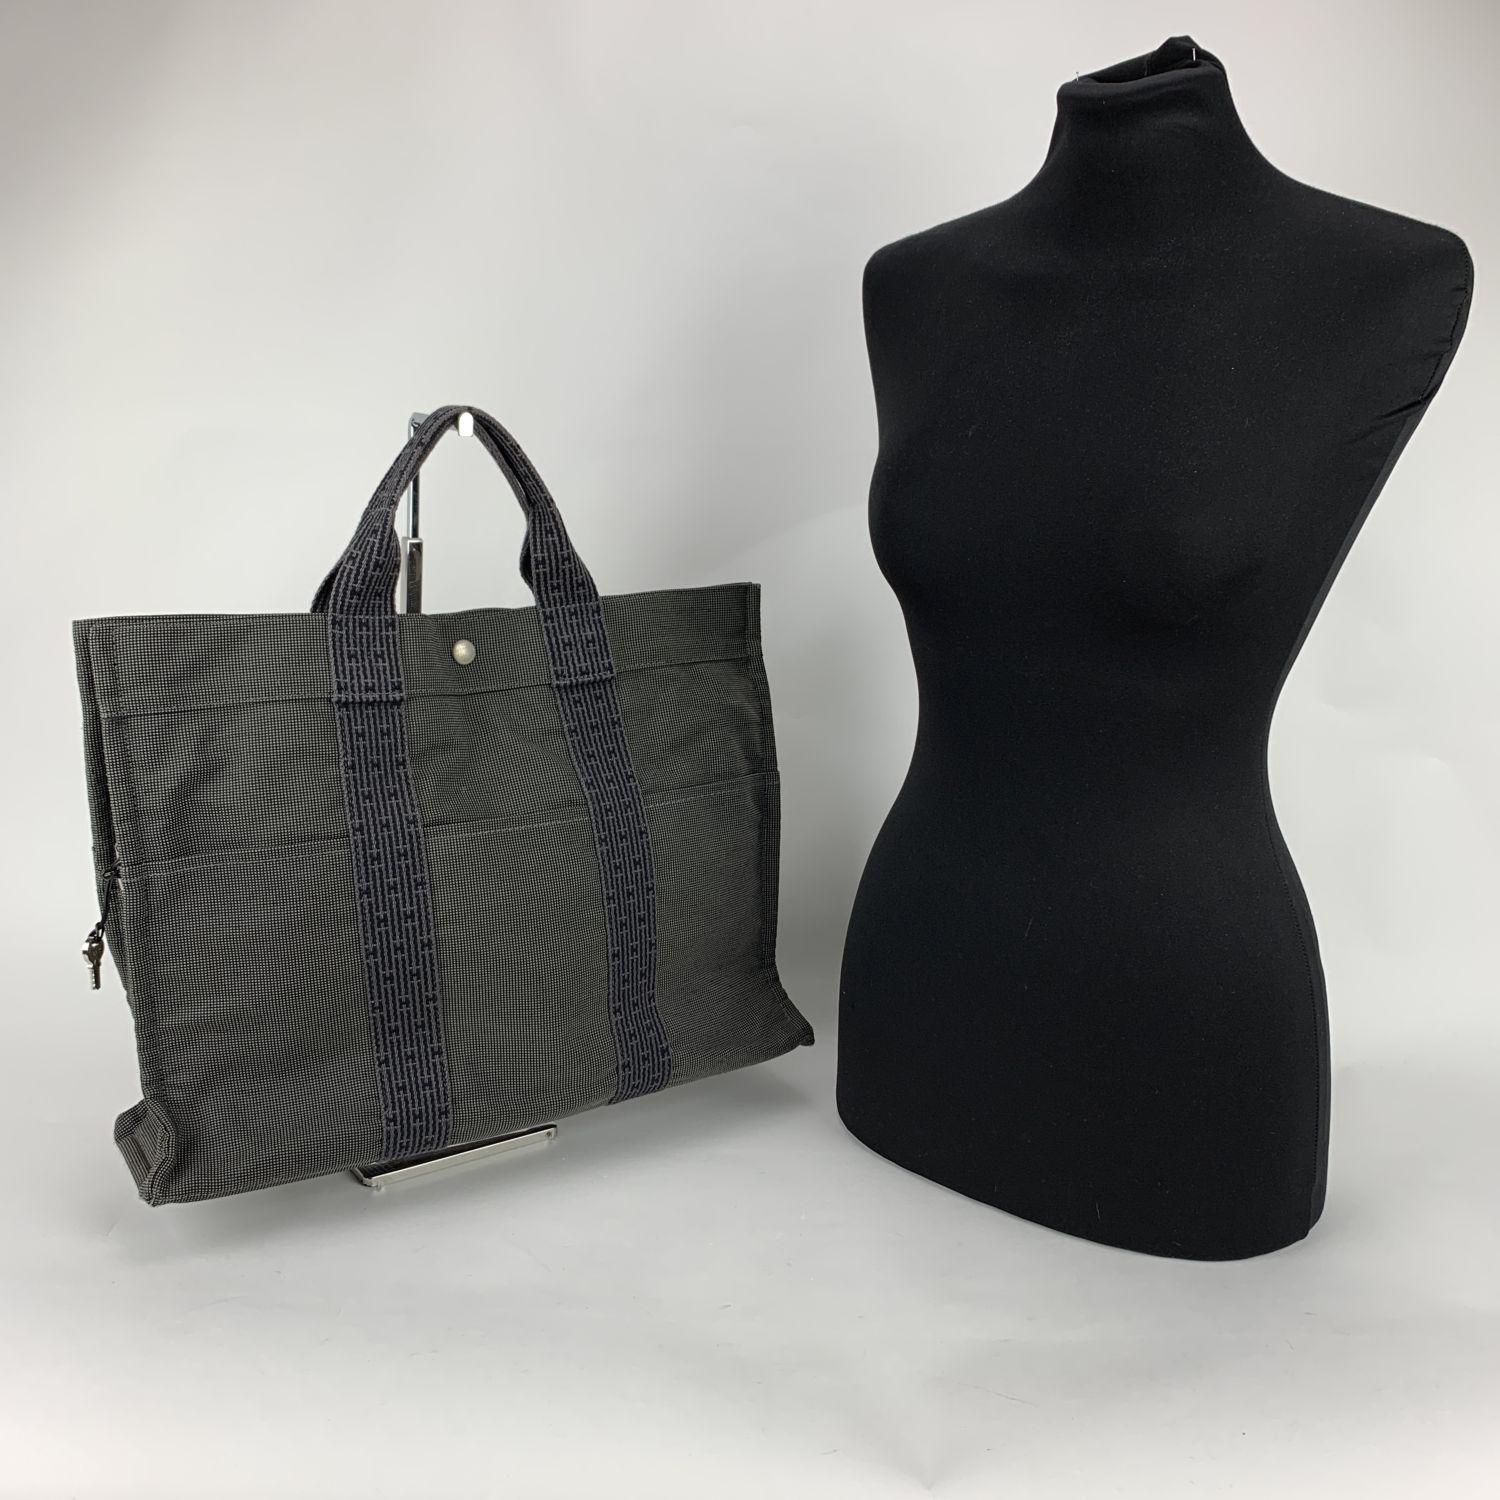 Hermes Canvas Herline Her Line MM Tote Bag in grey color. Made of a durable canvas. The tote has durable strap handles of a patterned Hermes H canvas. 3 open pockets on the front. Composition; 69% Polyamide, 31% Polyester. 3 snap button closure +